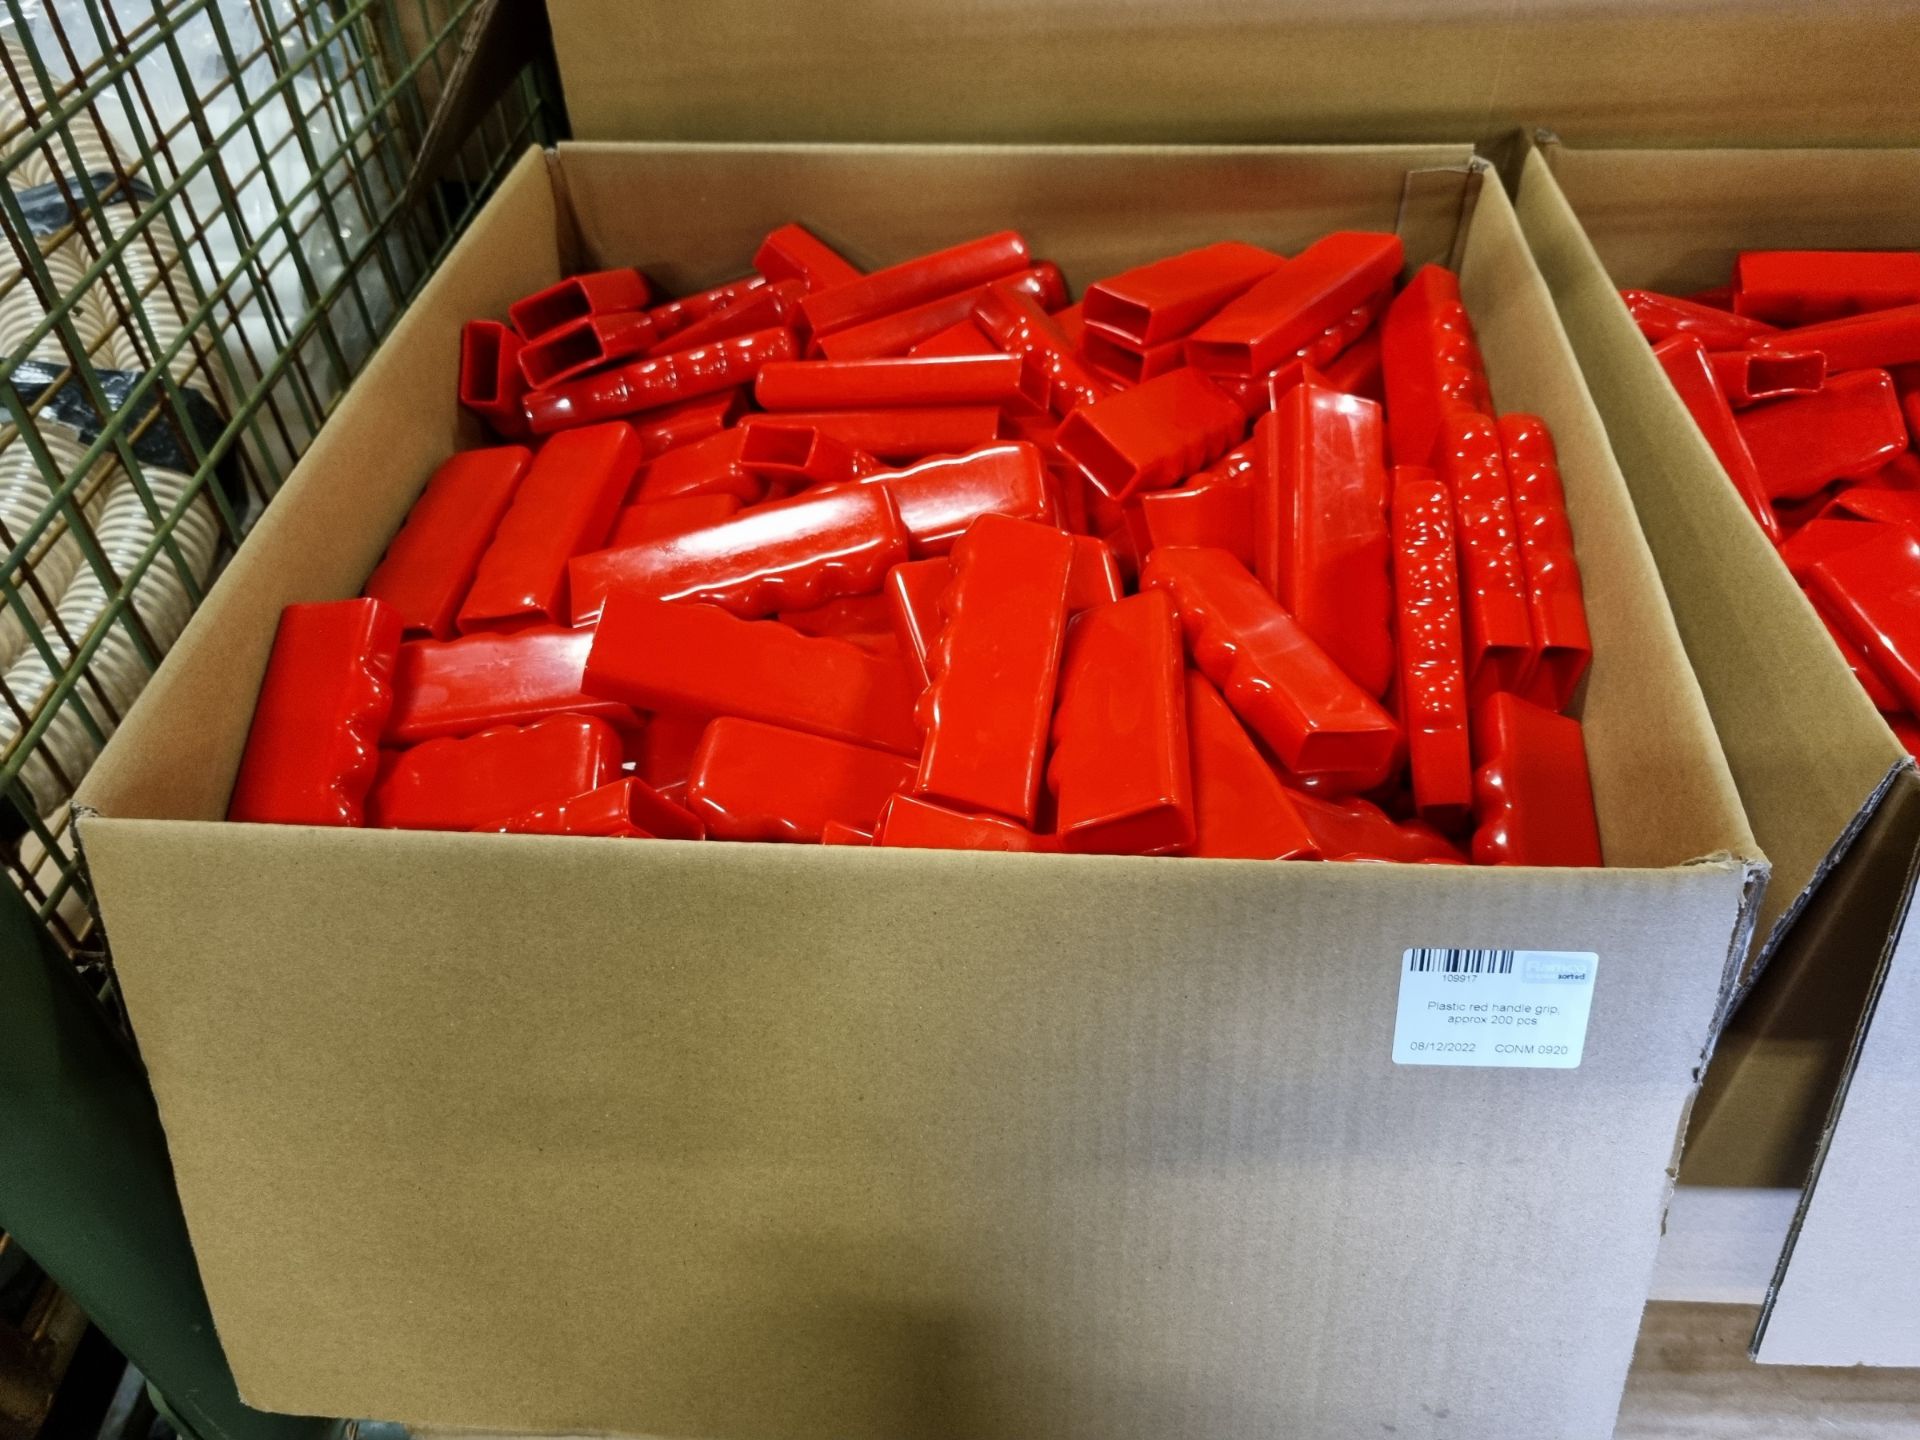 2x boxes of red plastic handle grips approx. 200 pcs per box, Plastic red handle grip mixed sizes - Image 3 of 5